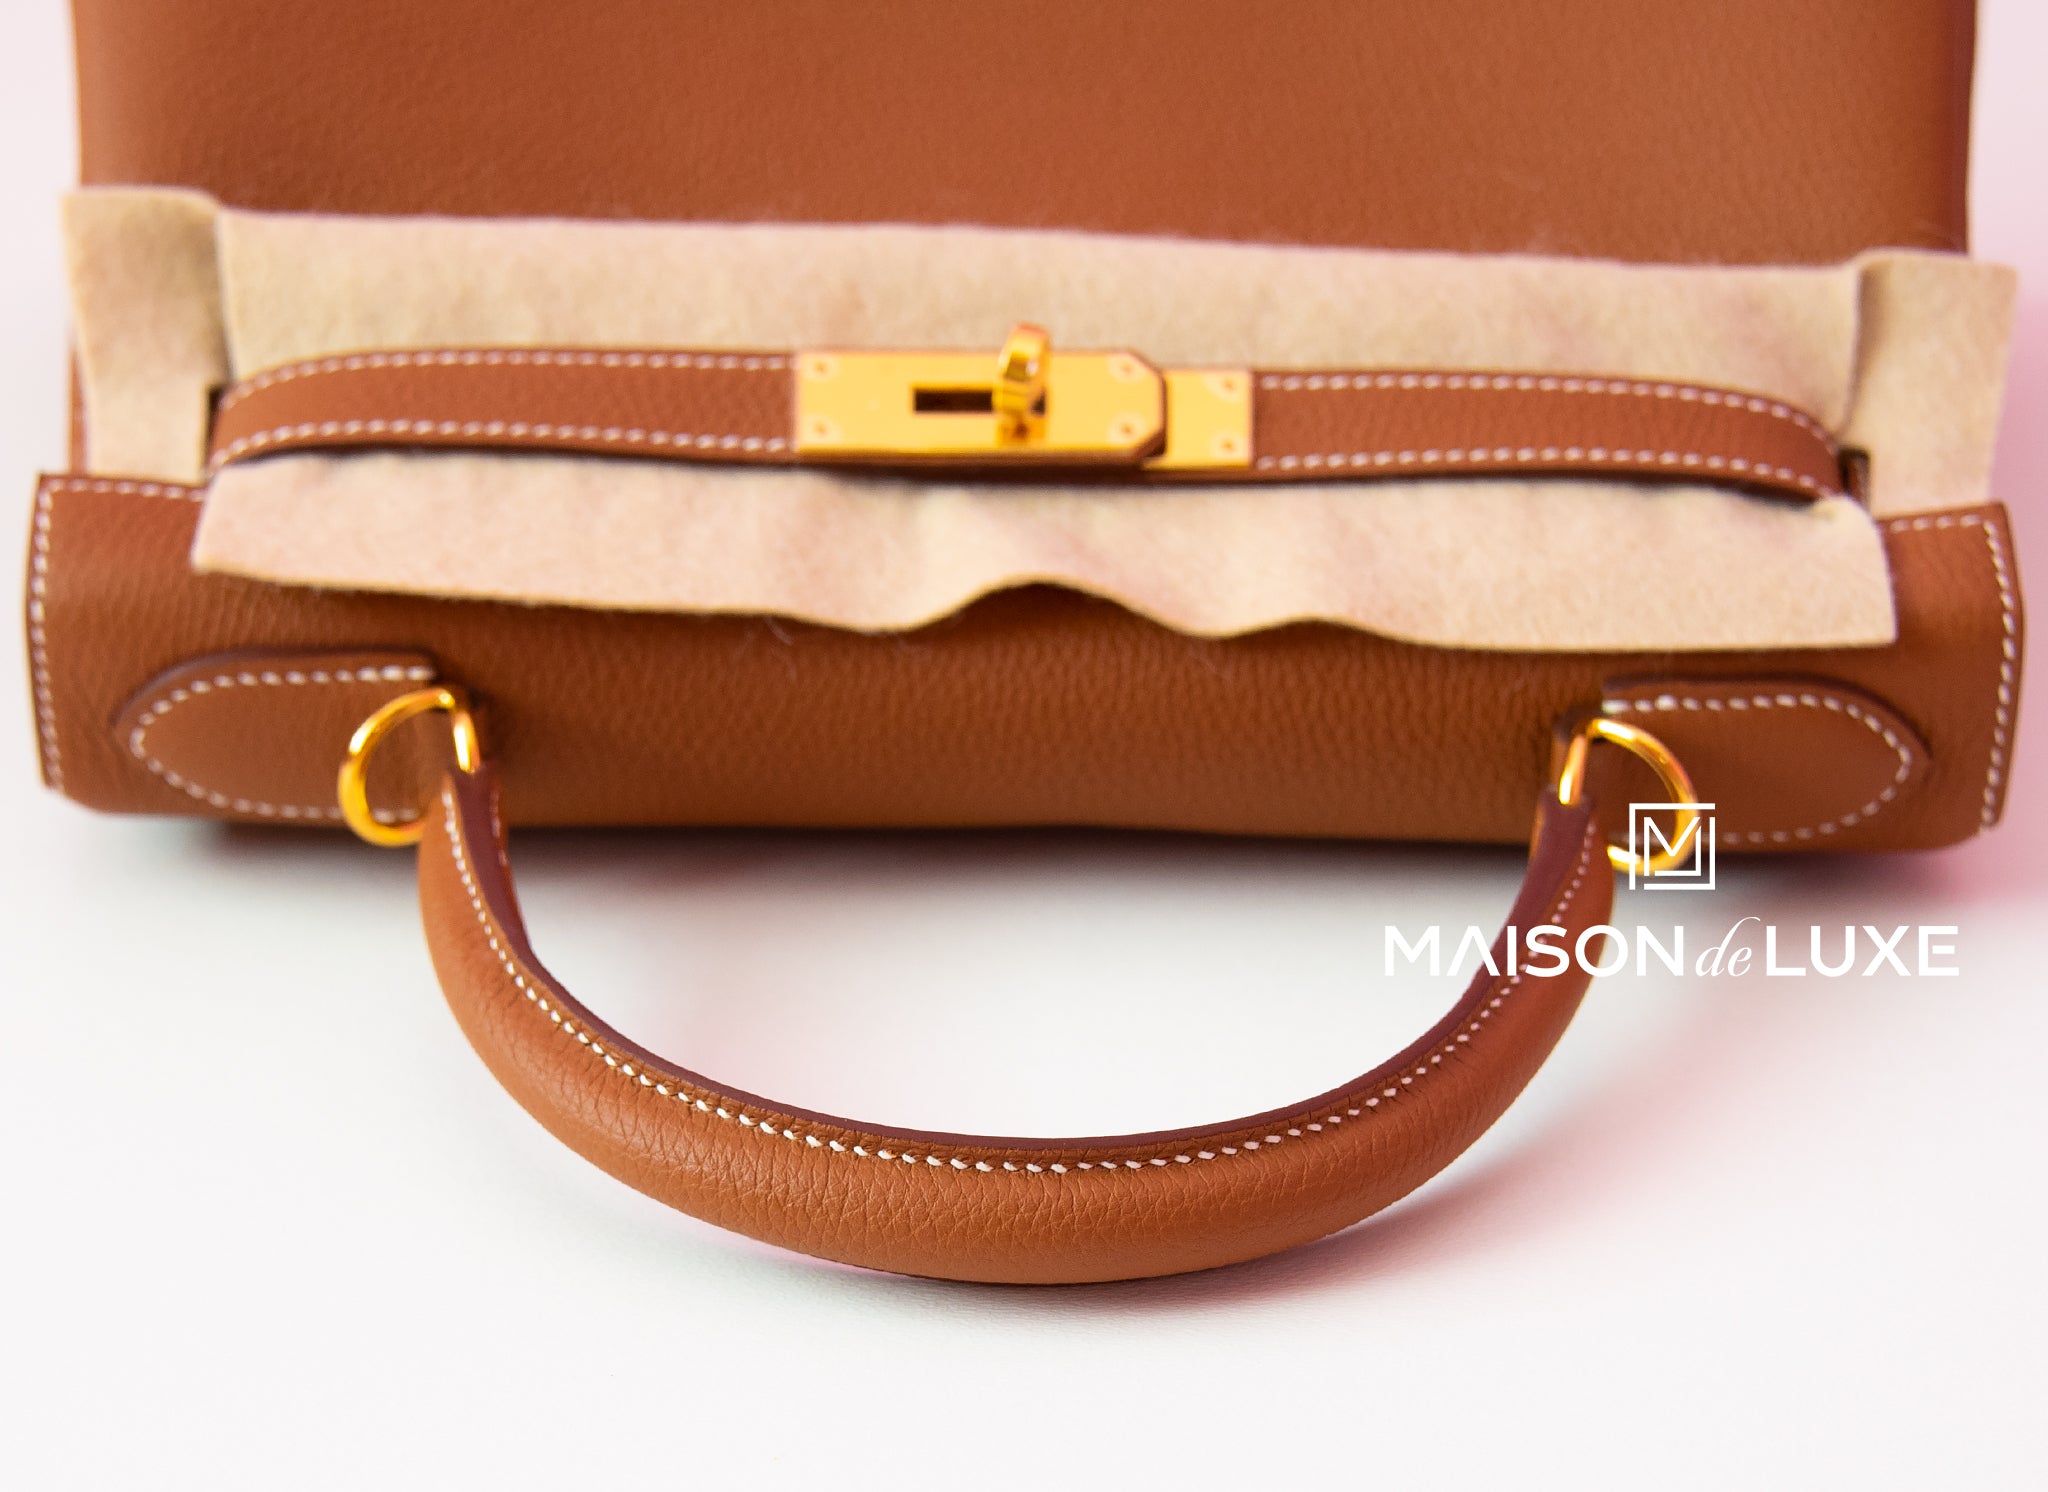 Kelly dépêches leather bag Hermès Brown in Leather - 34484921